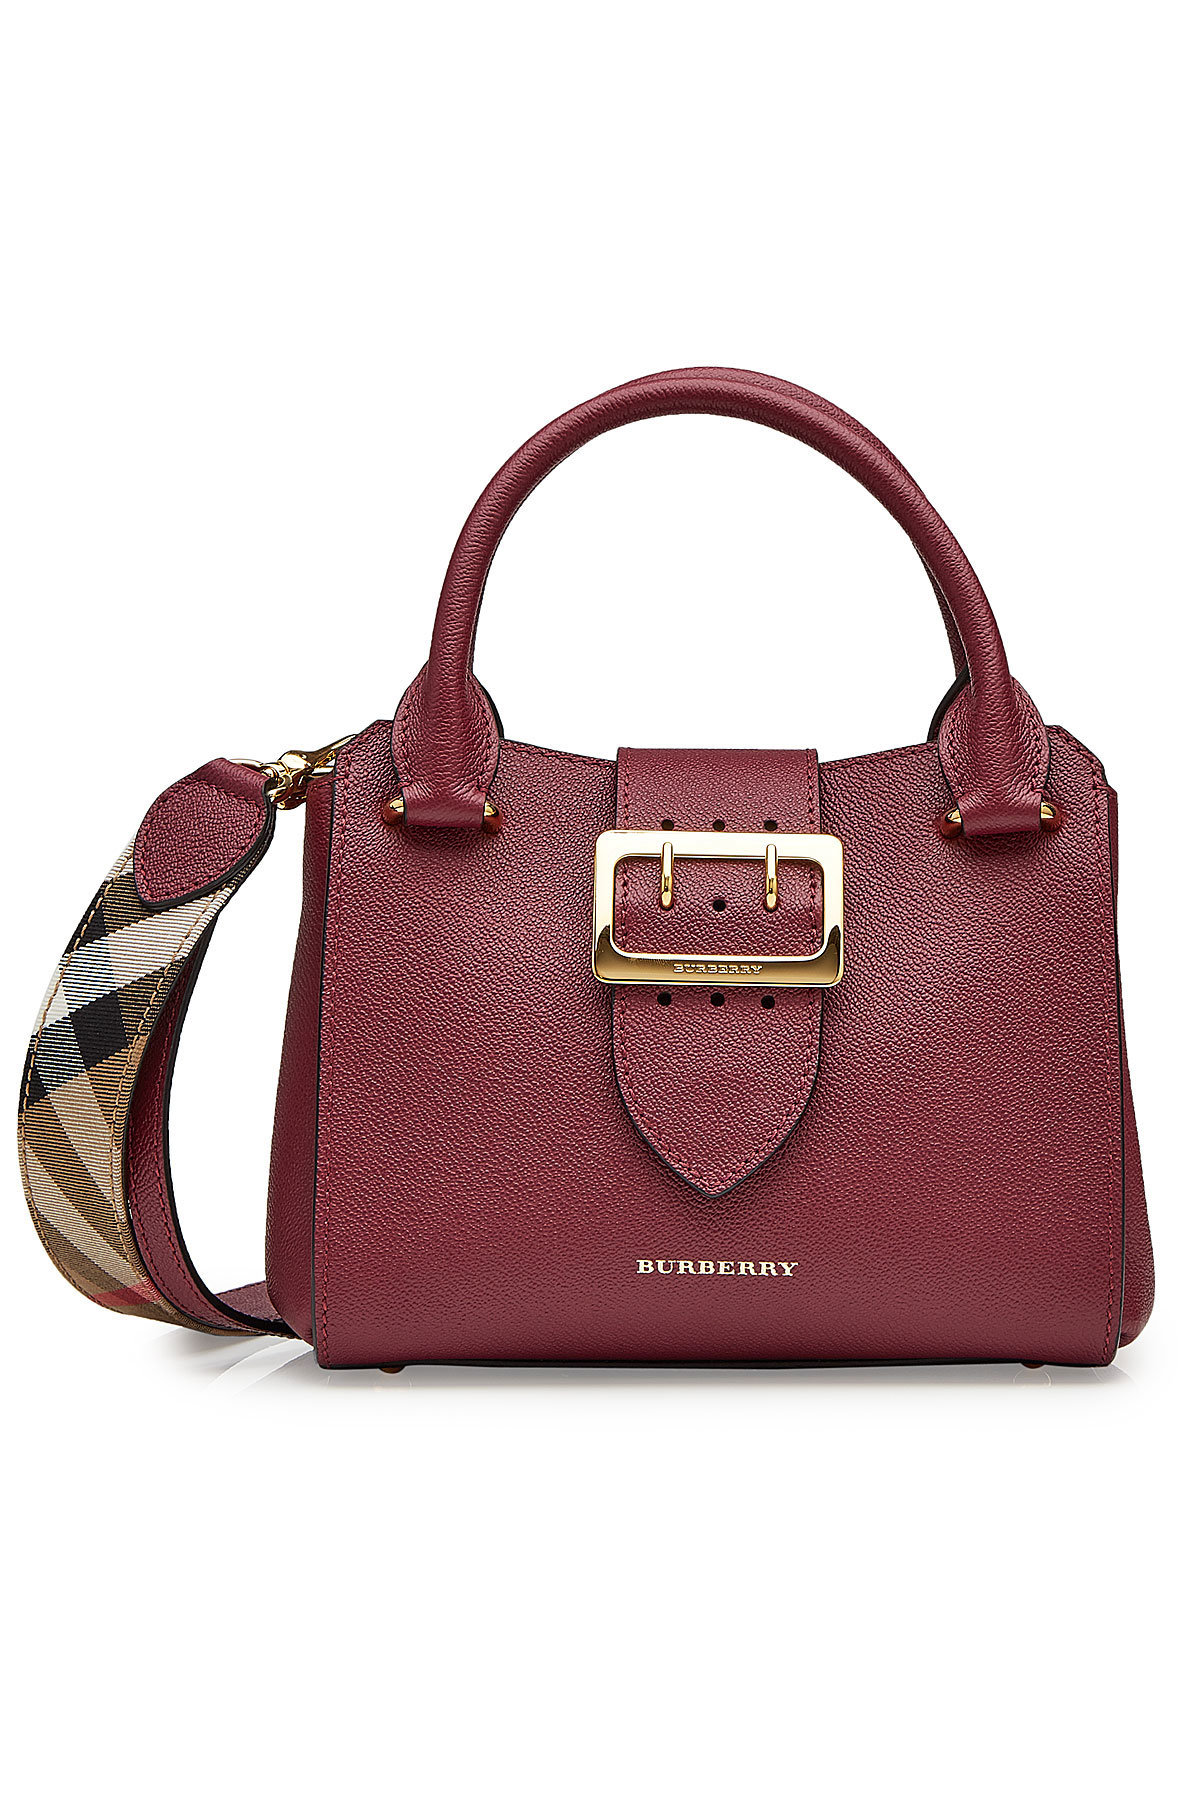 Burberry - Small Leather Tote with Buckle Detail